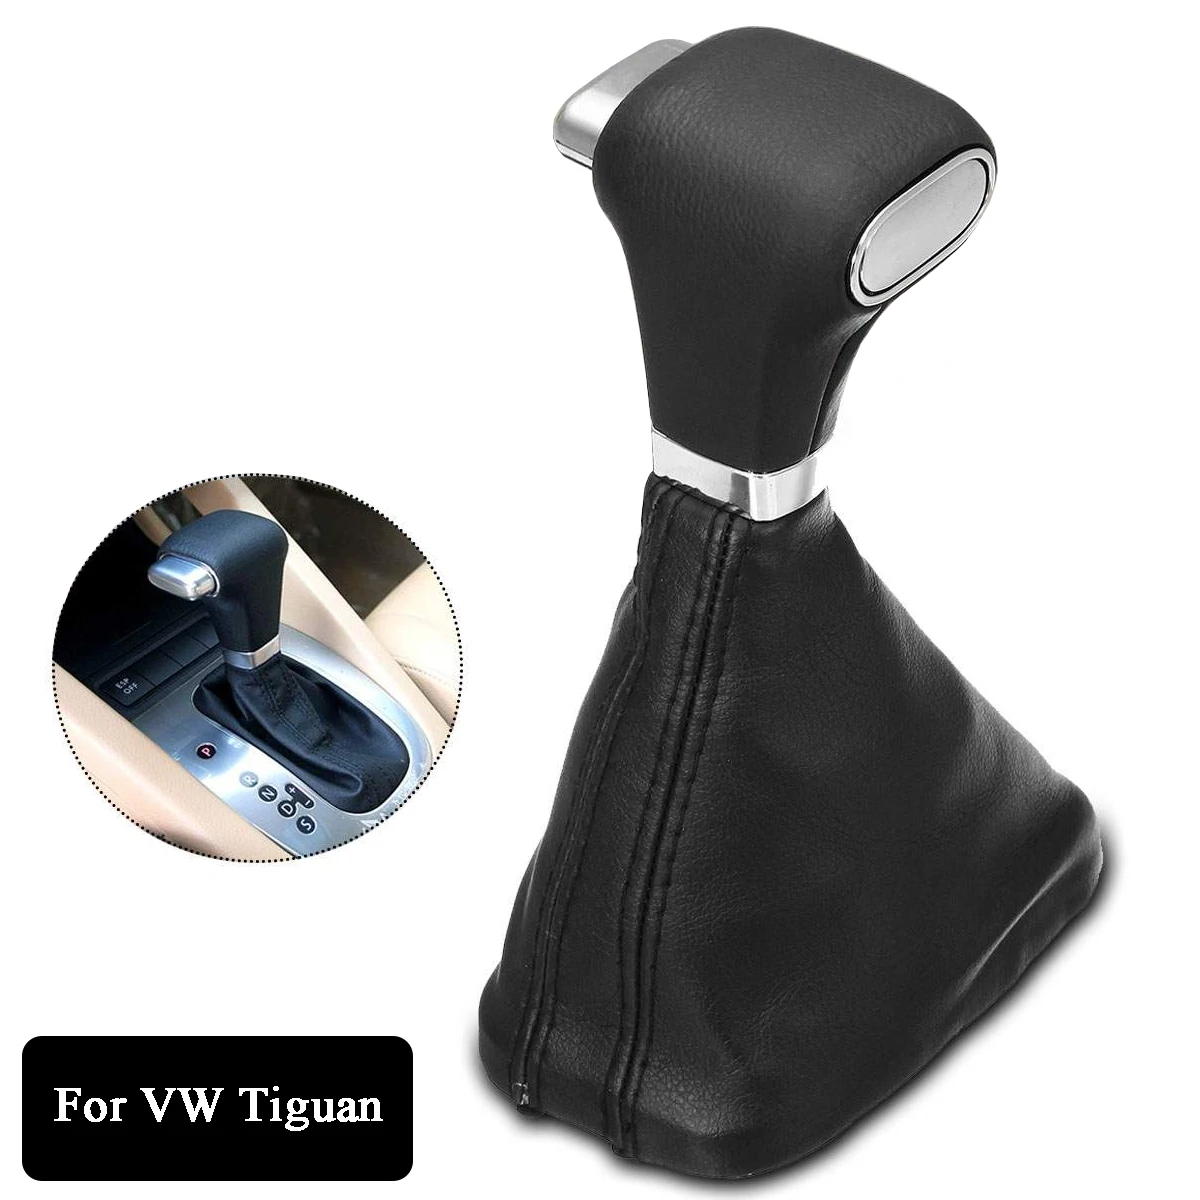 Shifting Knob For VW Tiguan MK5 Automatic Car Gear Stick Shift Knob With Leather Cover Car-Styling 2006-2011